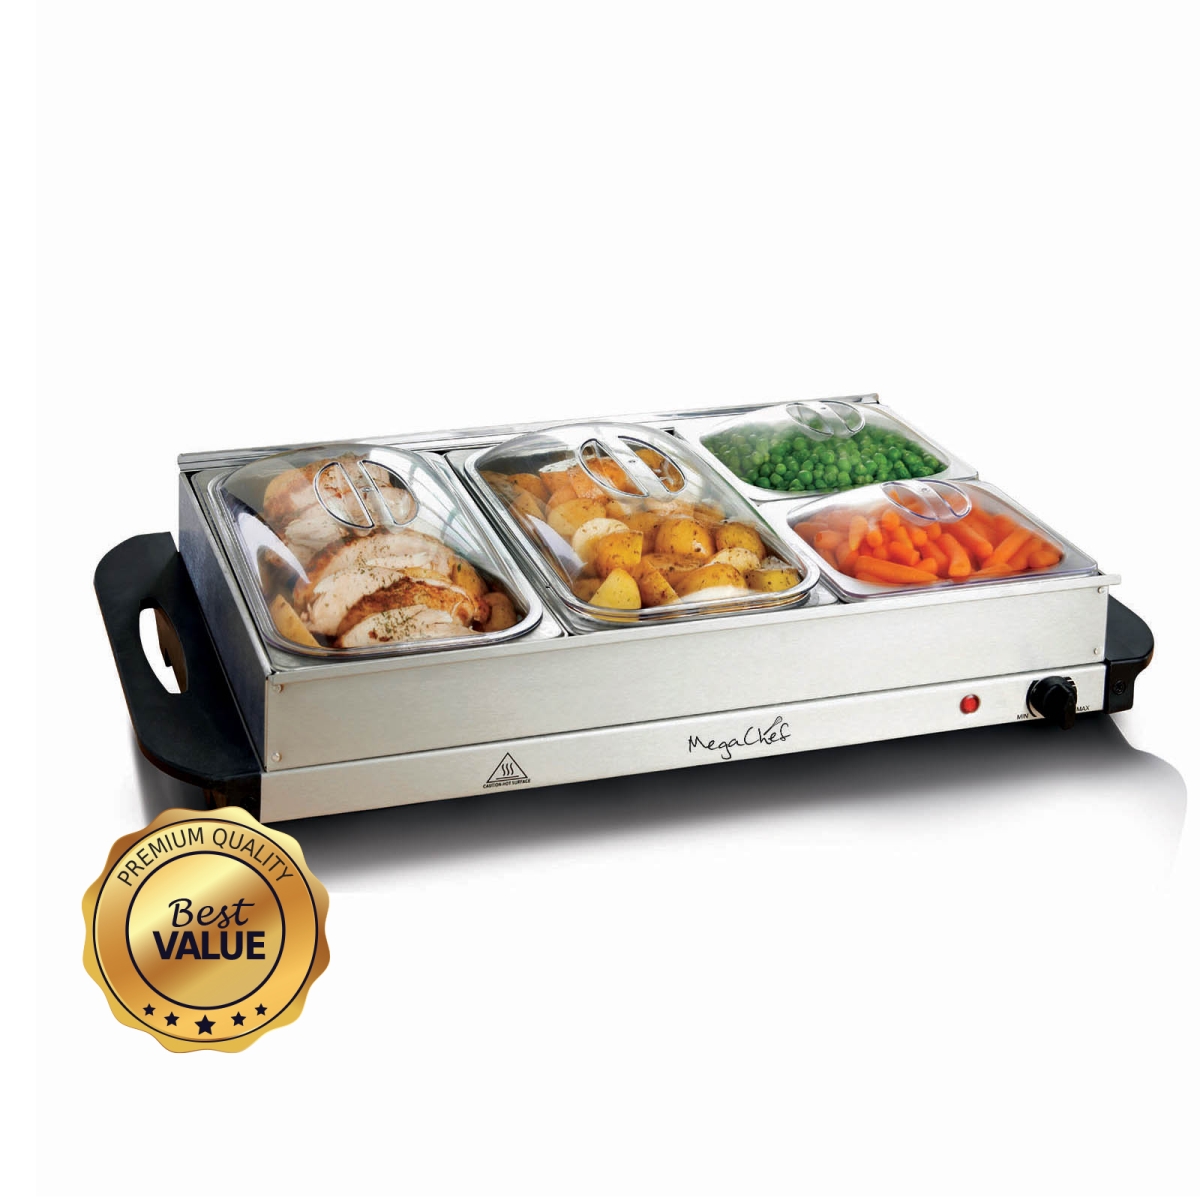 Mc-9003c Buffet Server & Food Warmer With 4 Removable Sectional Trays, Heated Warming Tray & Removable Tray Frame